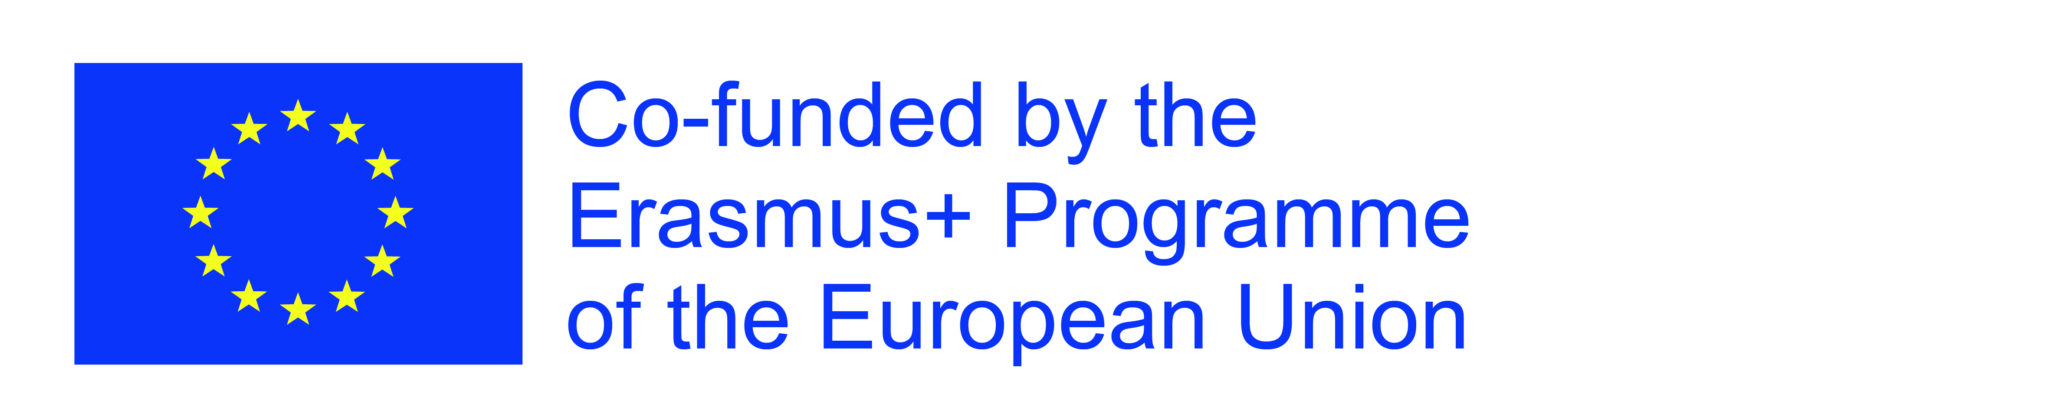 Image with text: Co-funded by the Erasmus+ Programme of the European Union